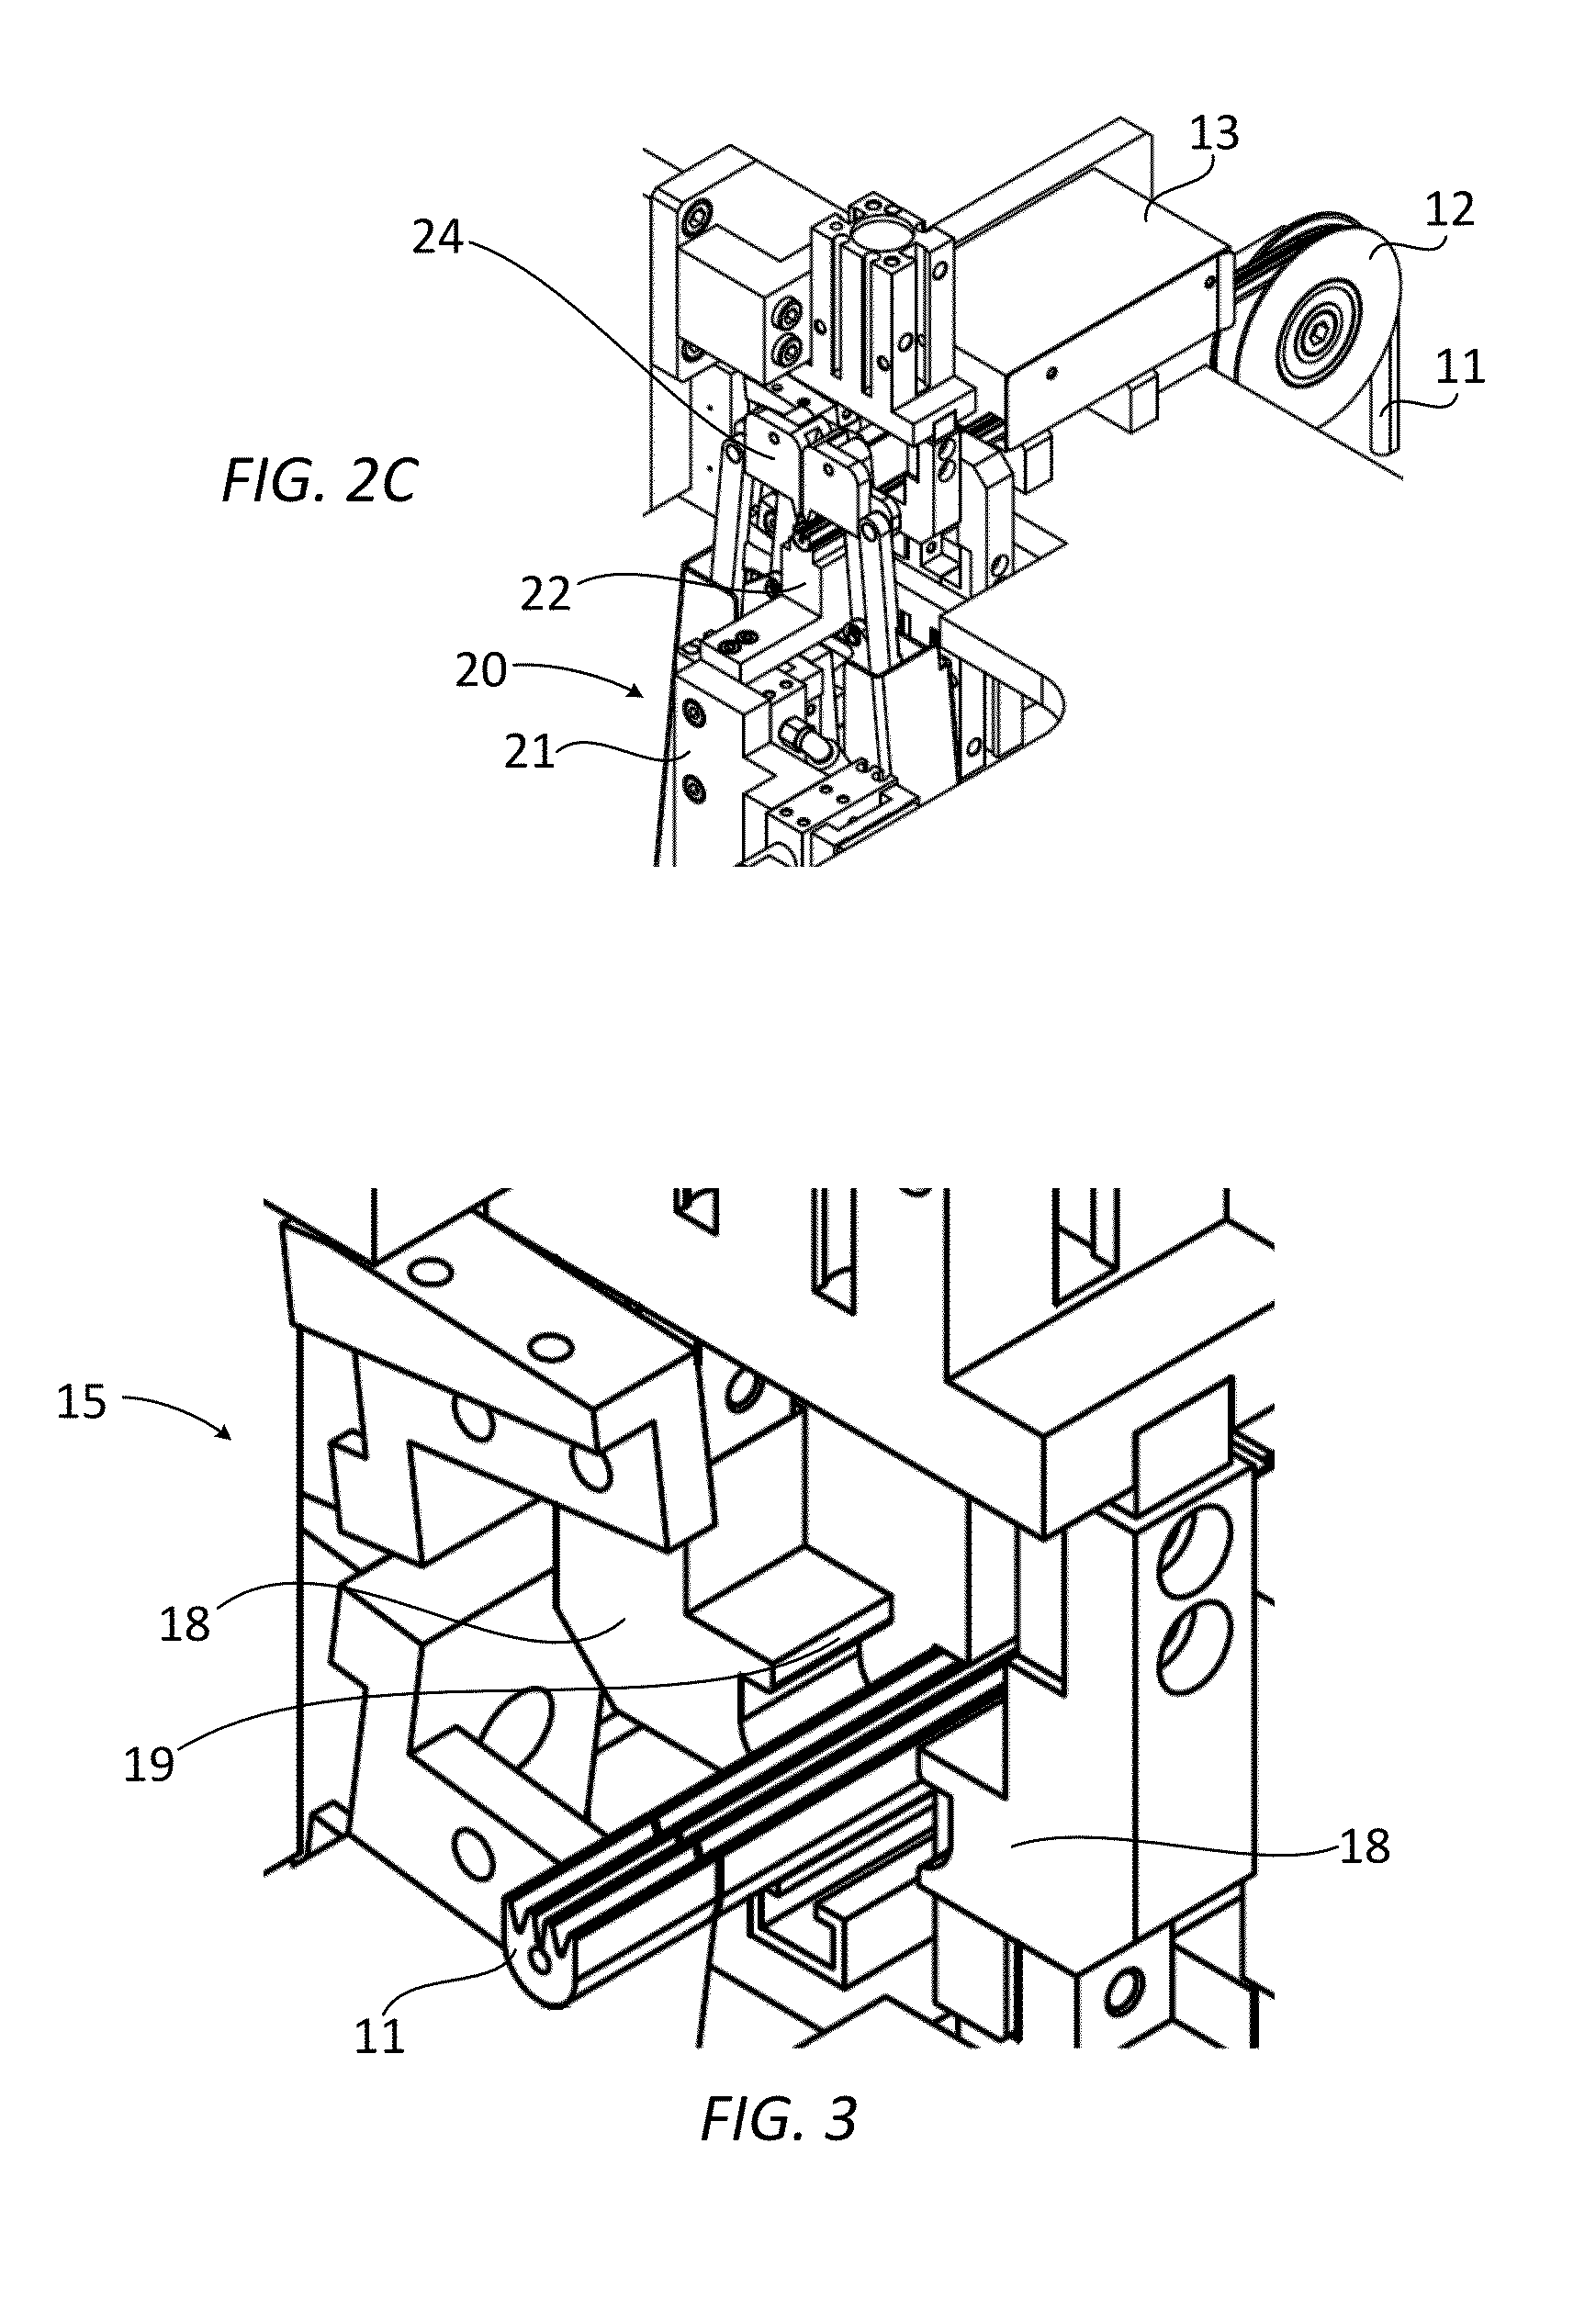 Graft element, system and method for joining plant stem sections using such graft element, and system and method for preparing such graft element